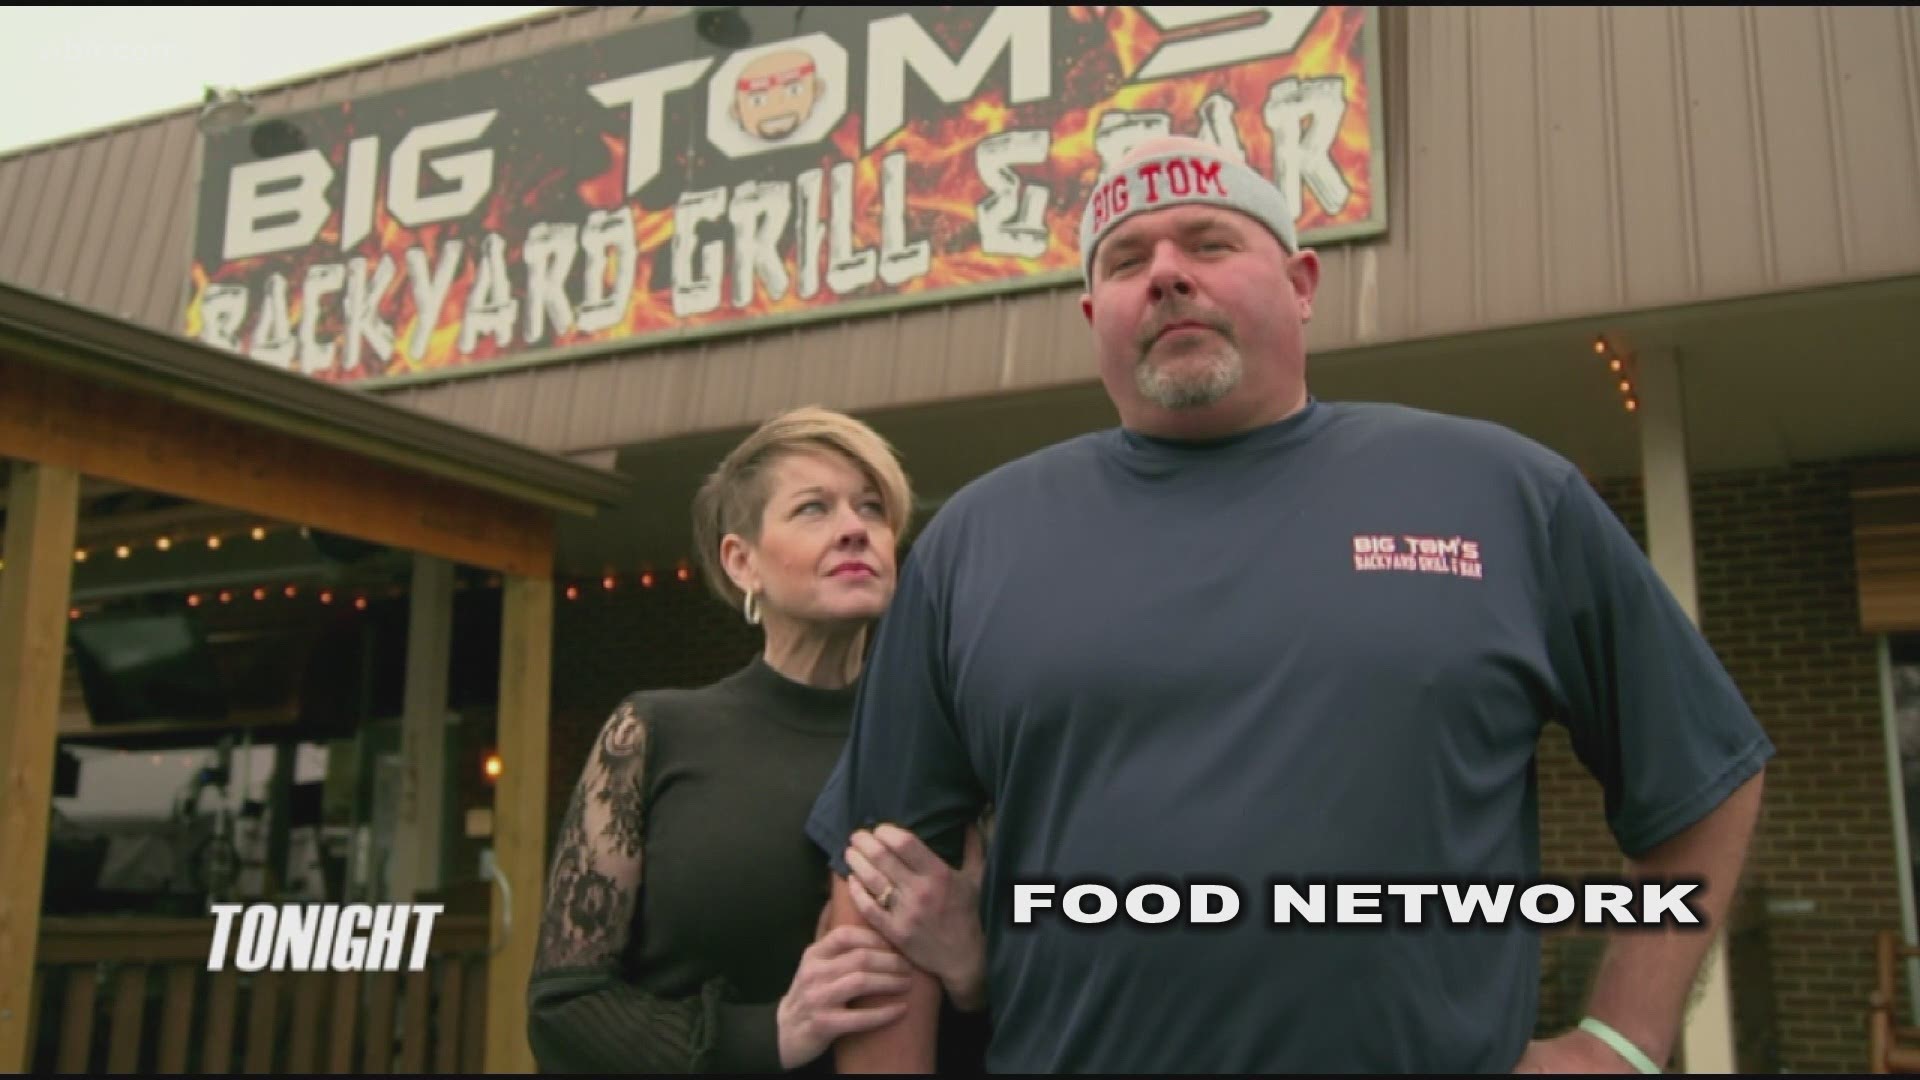 An East Tennessee restaurant got a second chance after being featured on Food Network's show Restaurant Impossible.